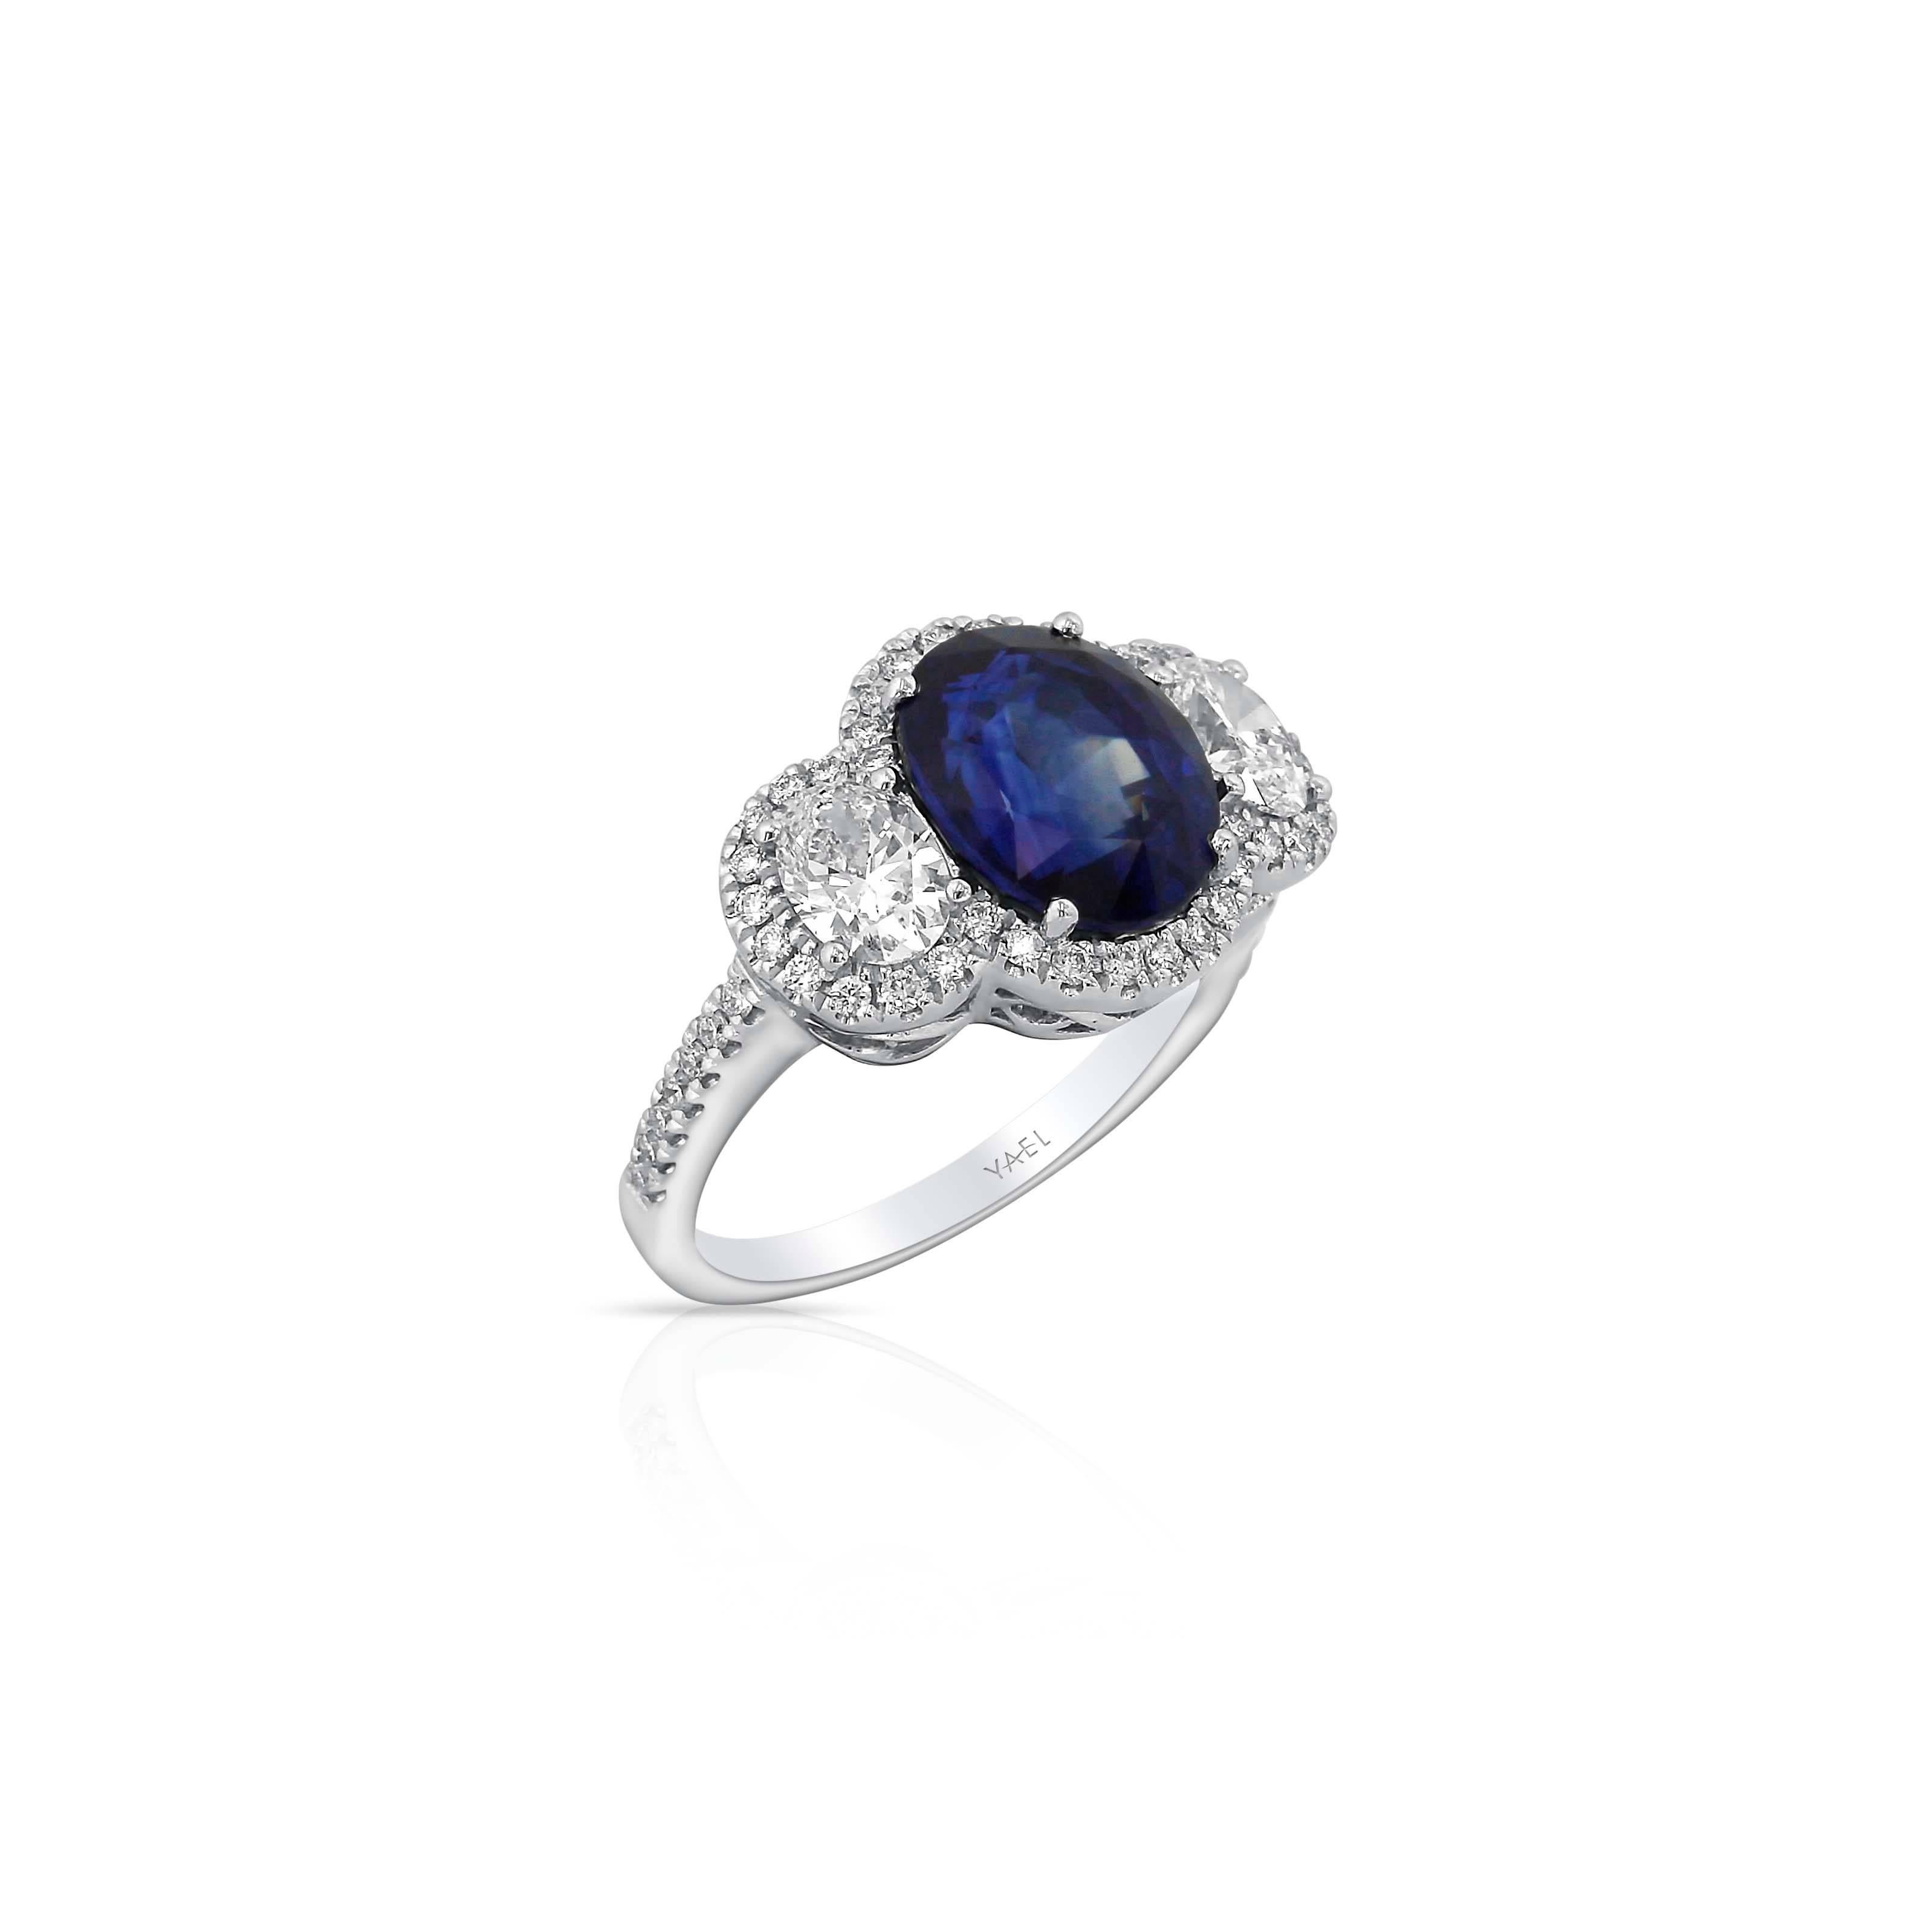 This three stone ring centers a magnificent sapphire between two well matched diamonds, the central motif surrounded by a modified halo to more strongly unify the parts into a sparkling whole. The ring is finished with diamond-set shoulders.

AGL